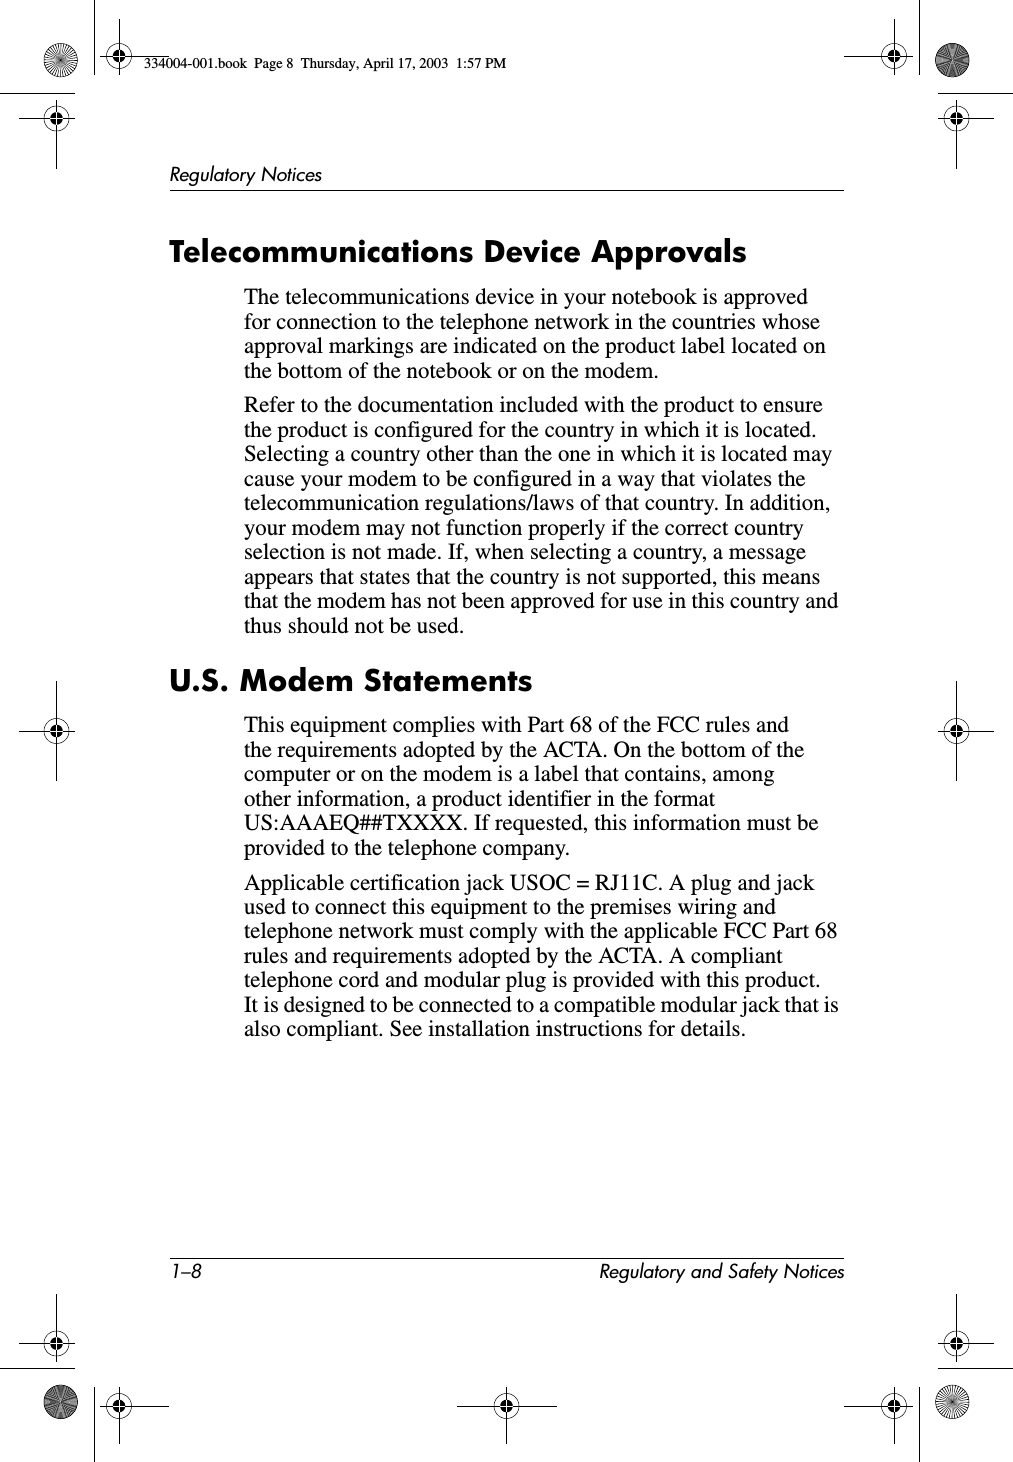 1–8 Regulatory and Safety NoticesRegulatory NoticesTelecommunications Device ApprovalsThe telecommunications device in your notebook is approved for connection to the telephone network in the countries whose approval markings are indicated on the product label located on the bottom of the notebook or on the modem.Refer to the documentation included with the product to ensure the product is configured for the country in which it is located. Selecting a country other than the one in which it is located may cause your modem to be configured in a way that violates the telecommunication regulations/laws of that country. In addition, your modem may not function properly if the correct country selection is not made. If, when selecting a country, a message appears that states that the country is not supported, this means that the modem has not been approved for use in this country and thus should not be used.U.S. Modem StatementsThis equipment complies with Part 68 of the FCC rules and the requirements adopted by the ACTA. On the bottom of the computer or on the modem is a label that contains, among other information, a product identifier in the format US:AAAEQ##TXXXX. If requested, this information must be provided to the telephone company.Applicable certification jack USOC = RJ11C. A plug and jack used to connect this equipment to the premises wiring and telephone network must comply with the applicable FCC Part 68 rules and requirements adopted by the ACTA. A compliant telephone cord and modular plug is provided with this product. It is designed to be connected to a compatible modular jack that is also compliant. See installation instructions for details.334004-001.book  Page 8  Thursday, April 17, 2003  1:57 PM